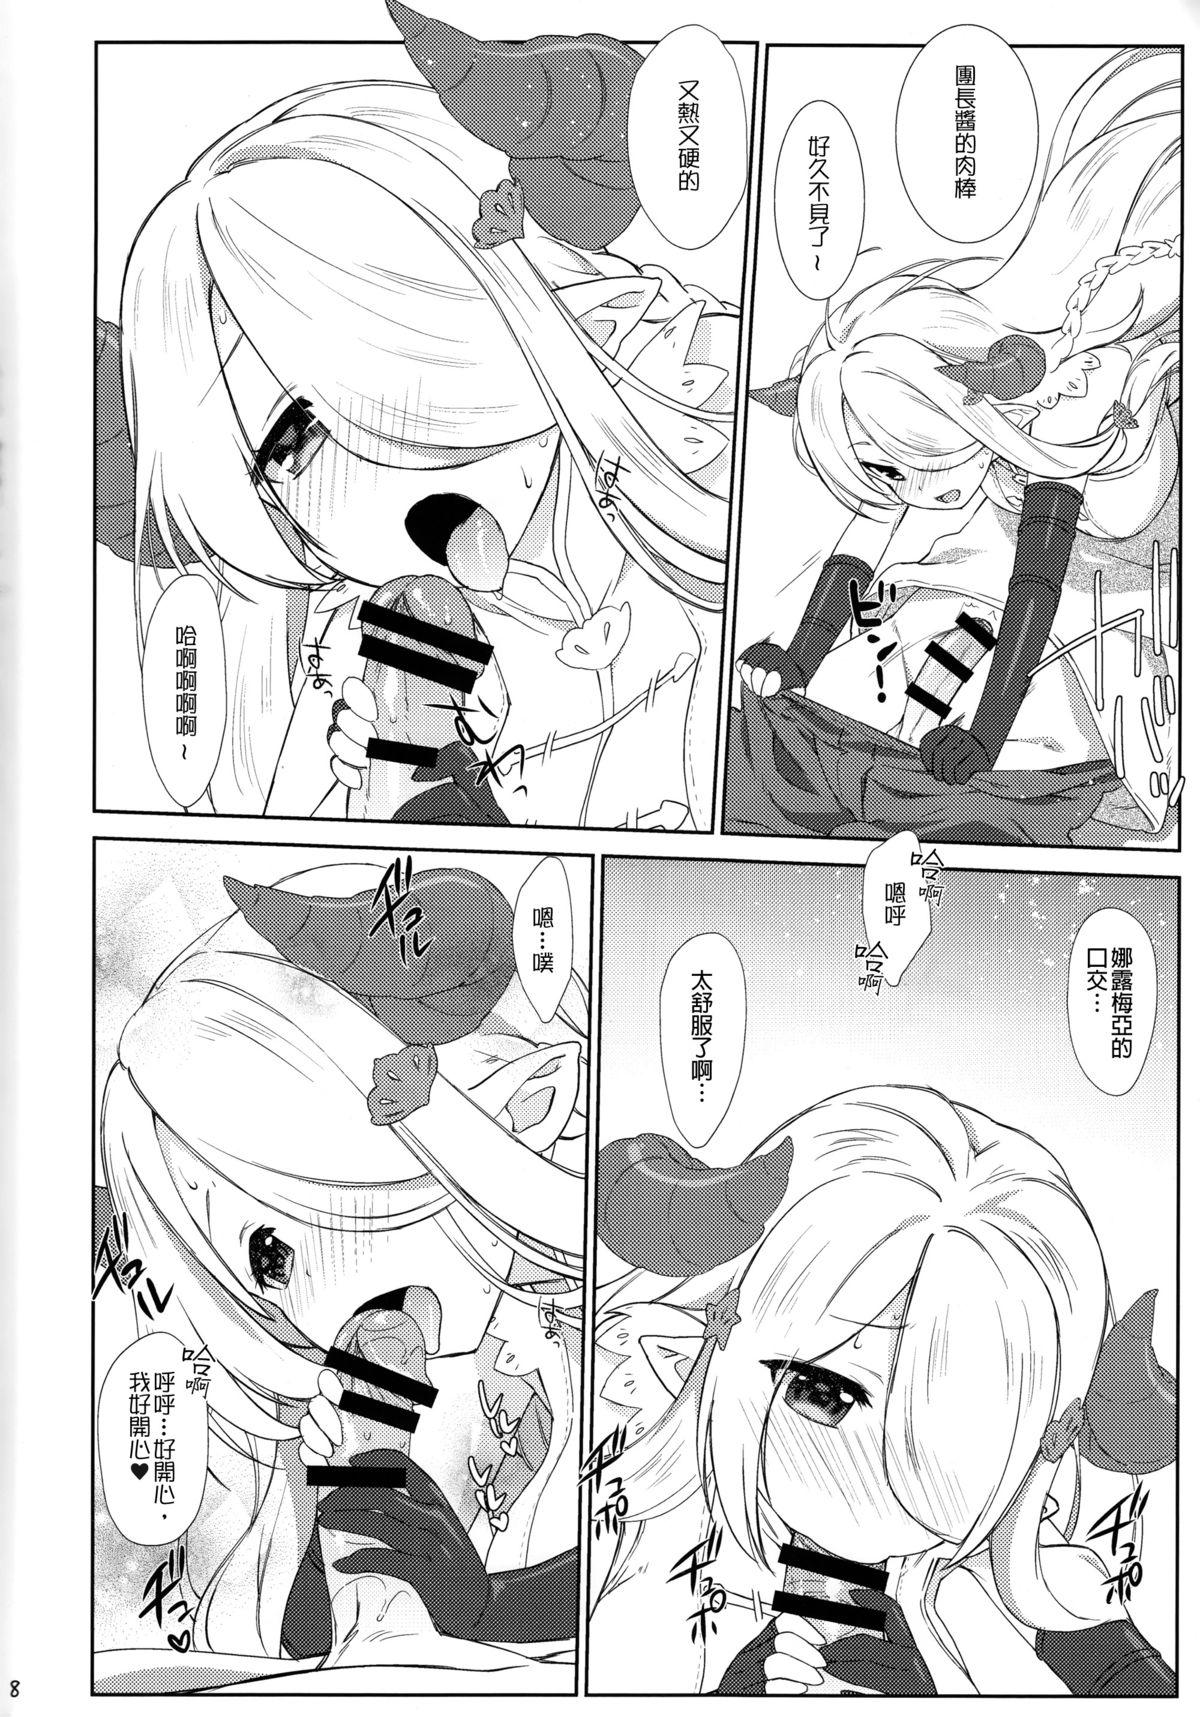 Pussylick Melcheese 54 - Granblue fantasy Sex - Page 8